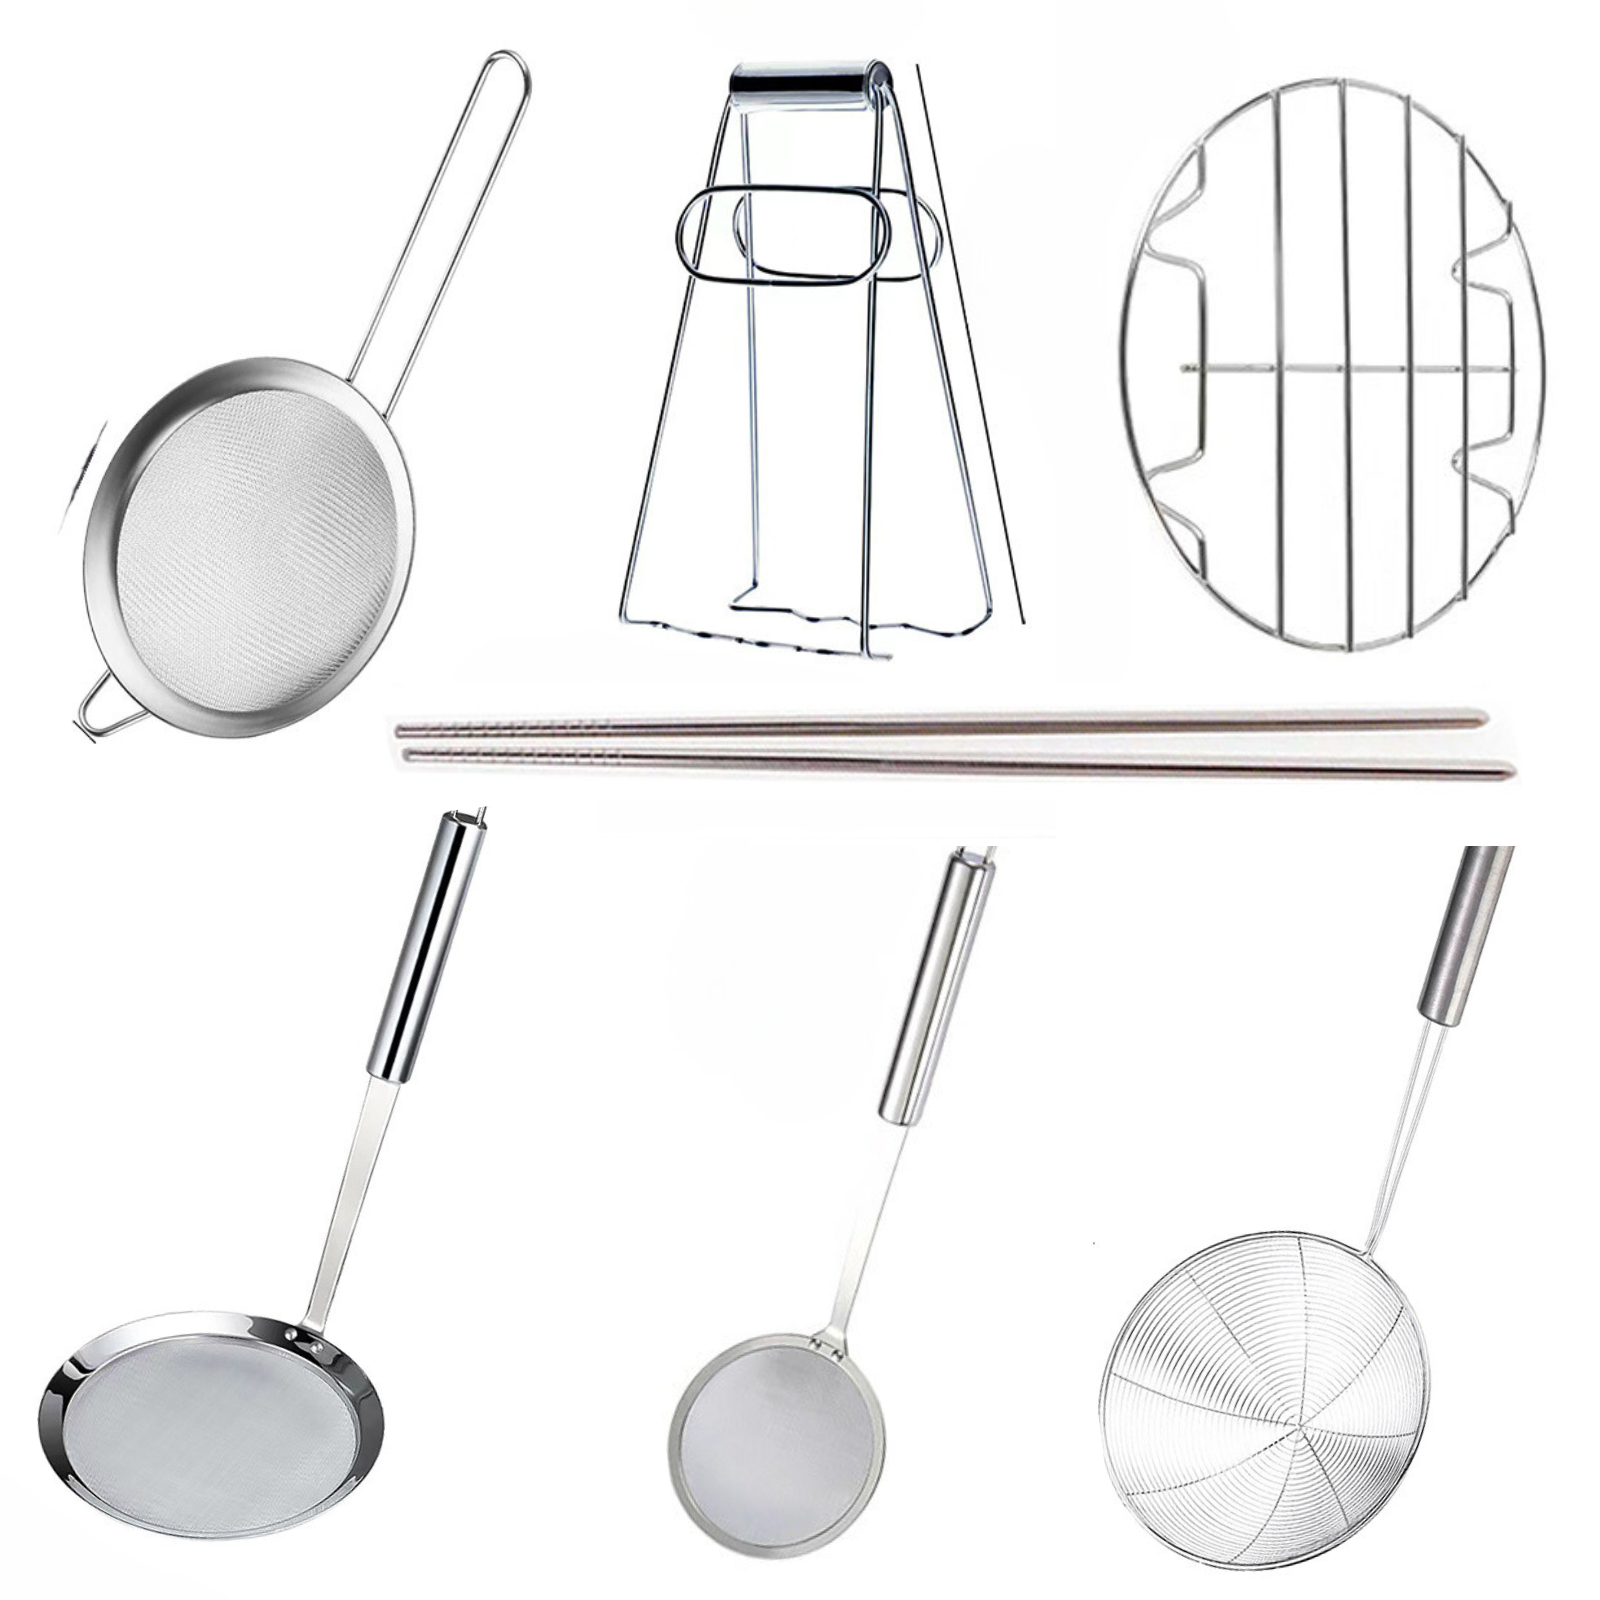 https://cdn.shopify.com/s/files/1/0595/3850/5936/files/chinesecookingutensilset.png?v=1698125175&width=2000